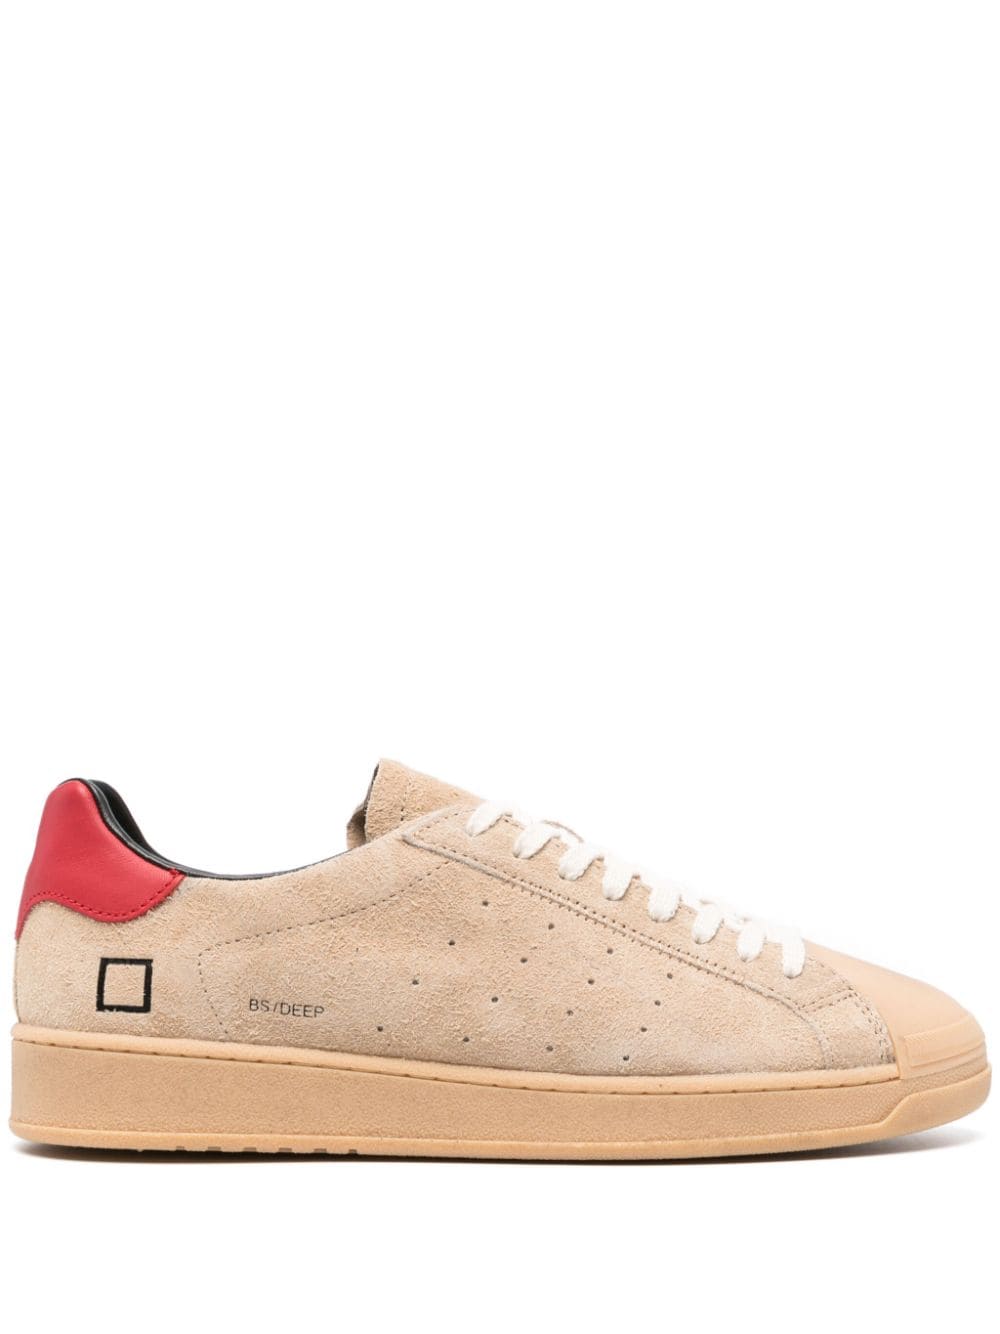 Date Base Deep Leather Sneakers In Nude